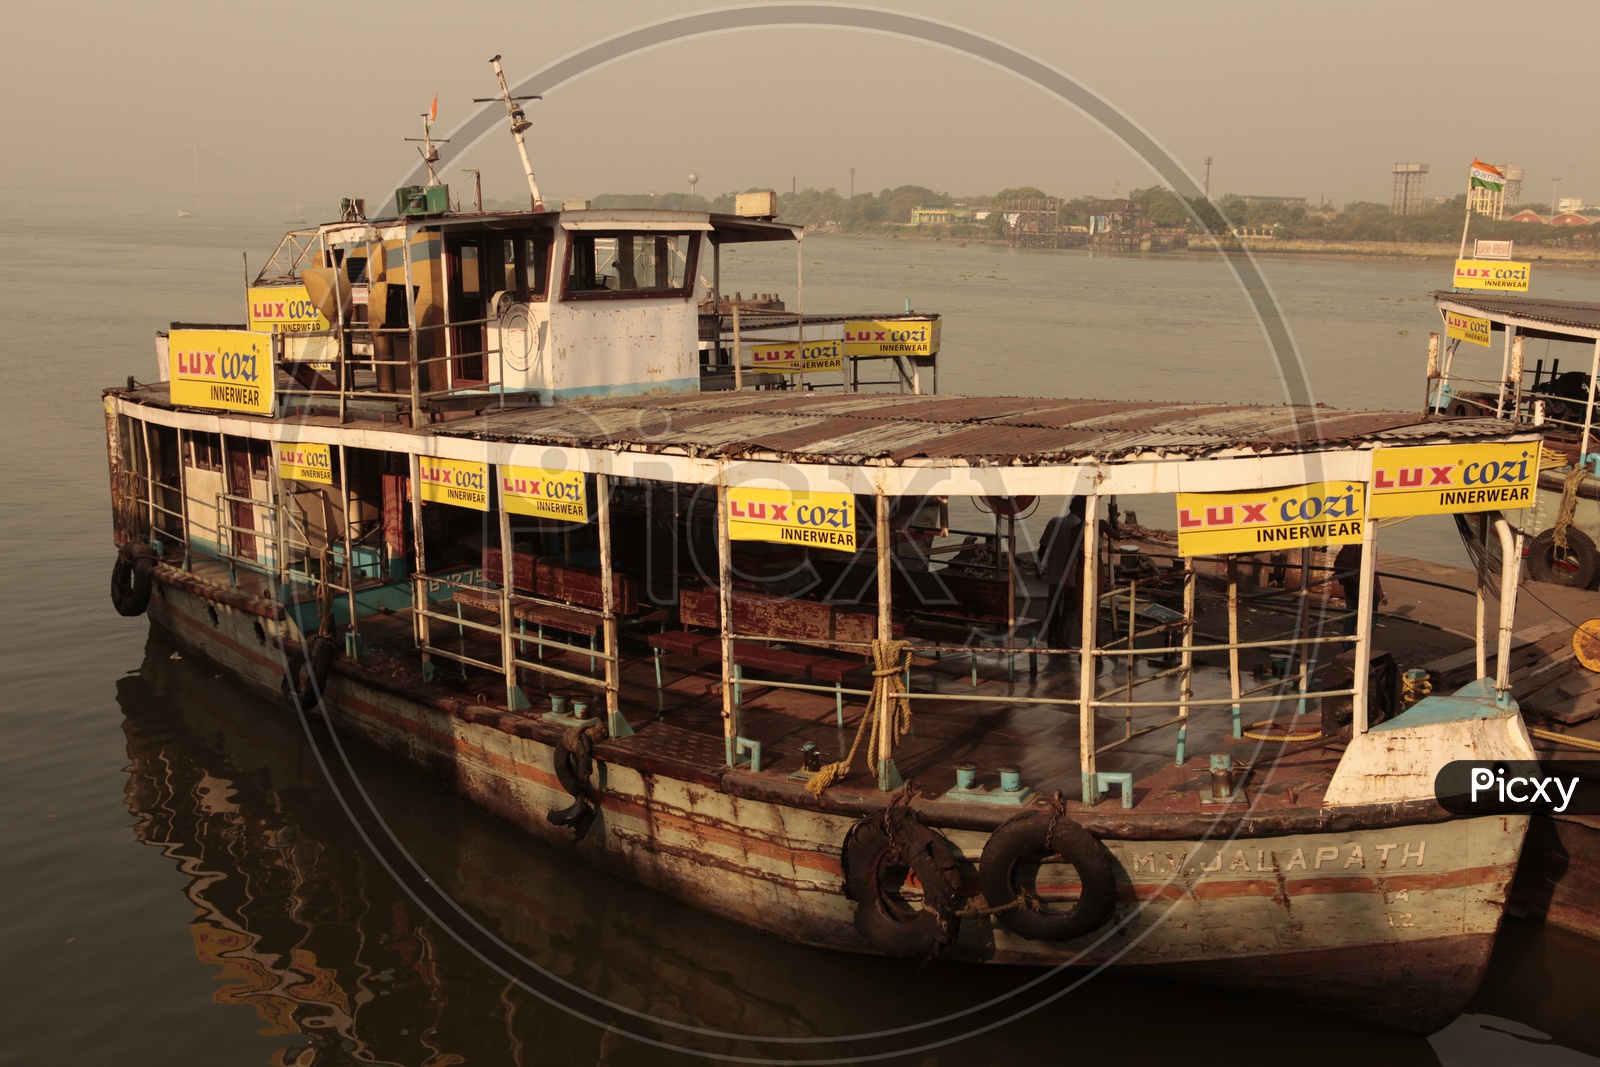 Ferry Boat alongside the Hooghly River